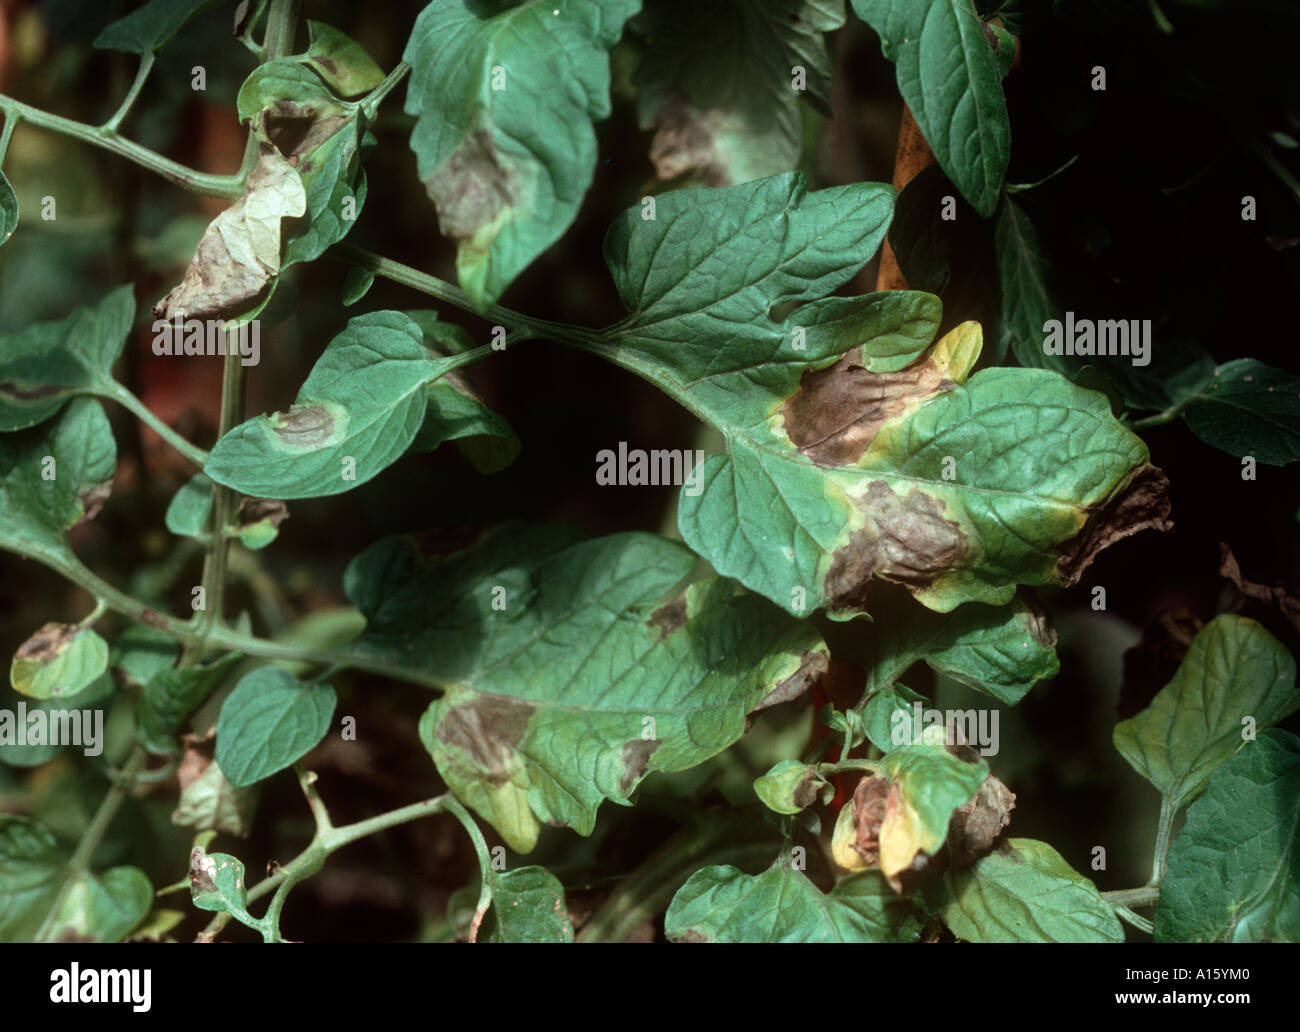 Tomato late blight Phytophthora infestans on tomato leaves Stock Photo